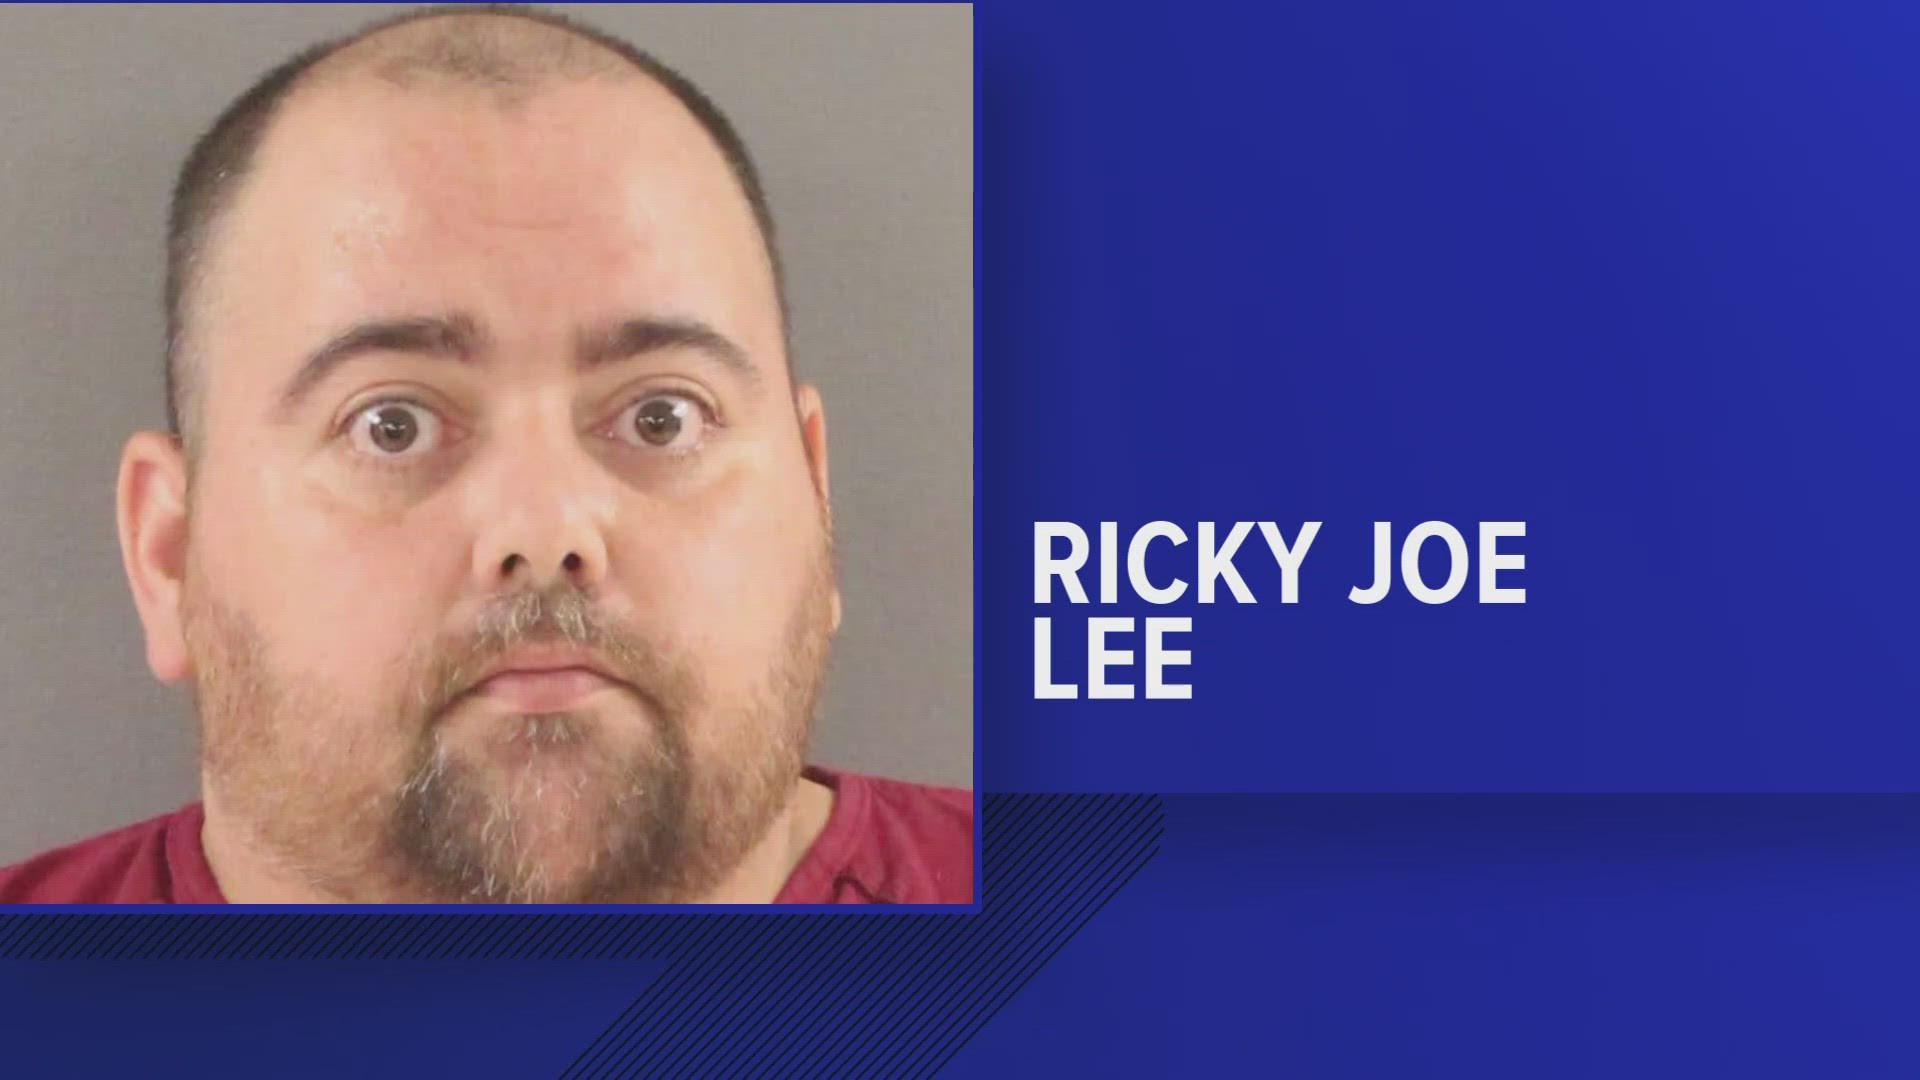 The Knox County Sheriff's Office said they were searching for Ricky Joe Lee, after finding several drugs.